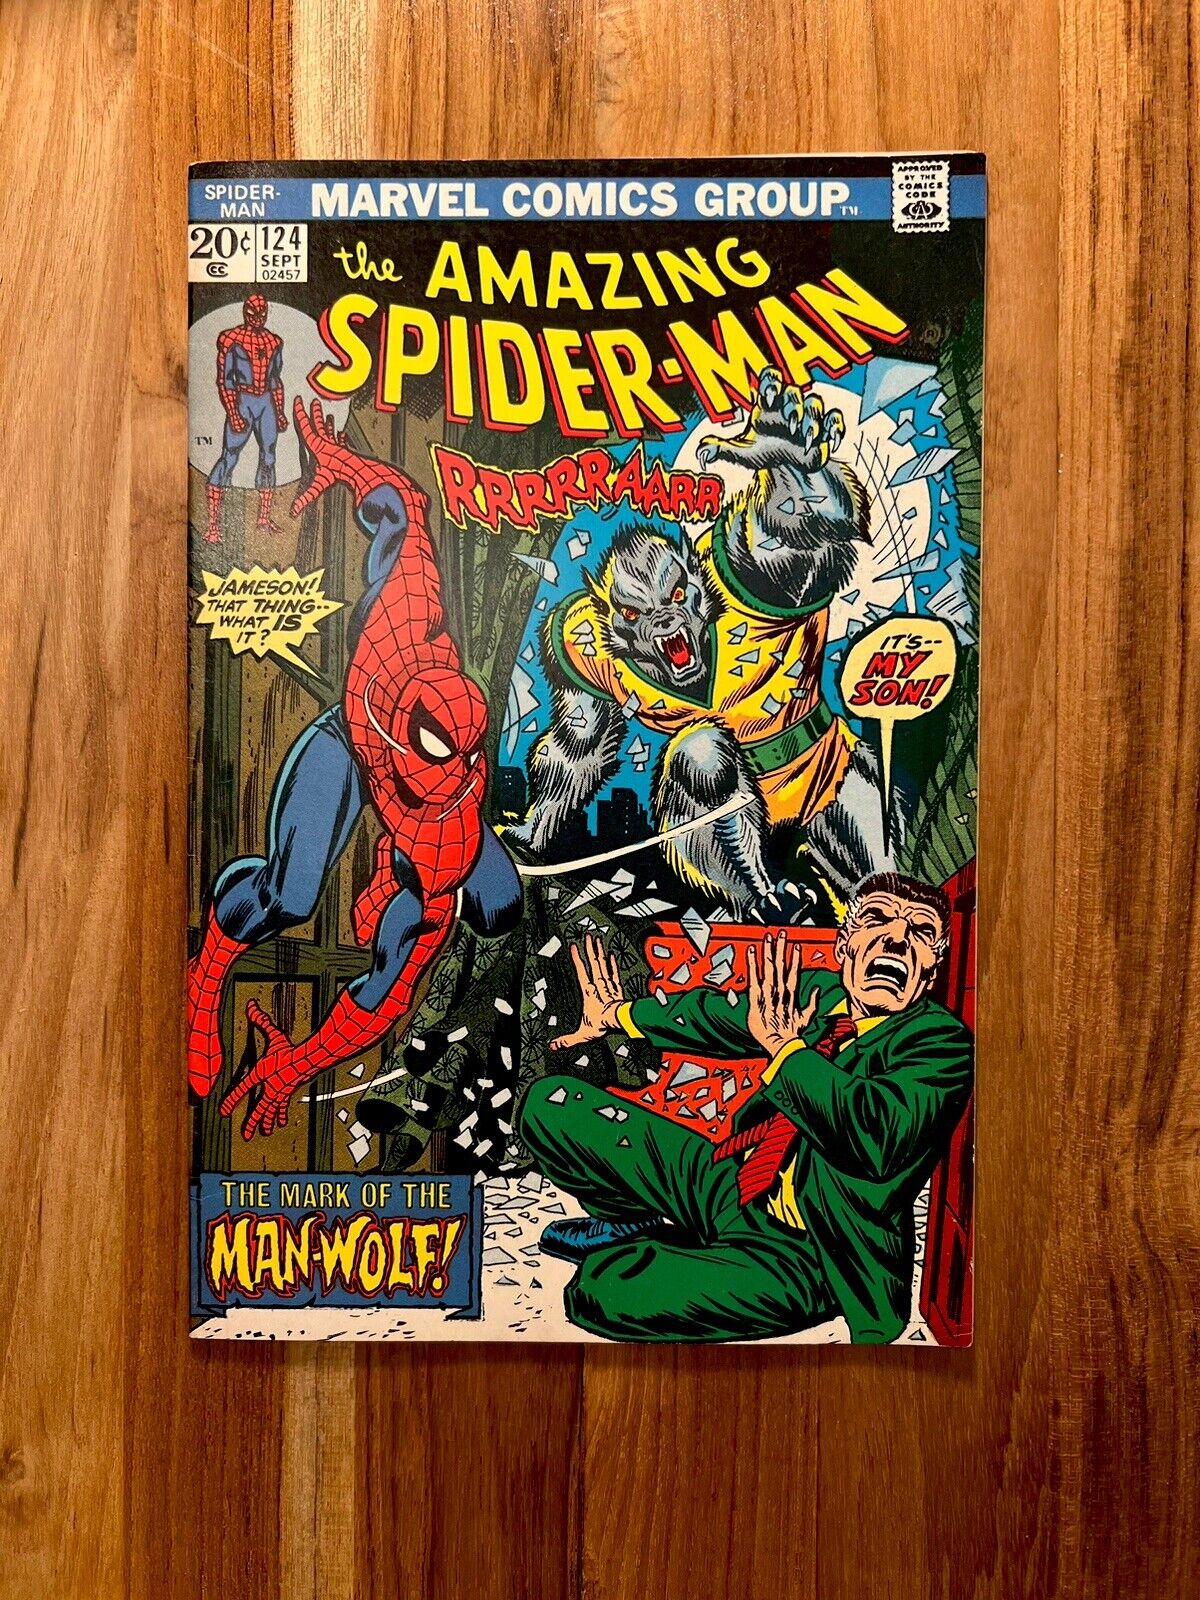 The Amazing Spider-Man #124 1st Man-Wolf HIGH GRADE - LIGHT COLOR TOUCH See Pic